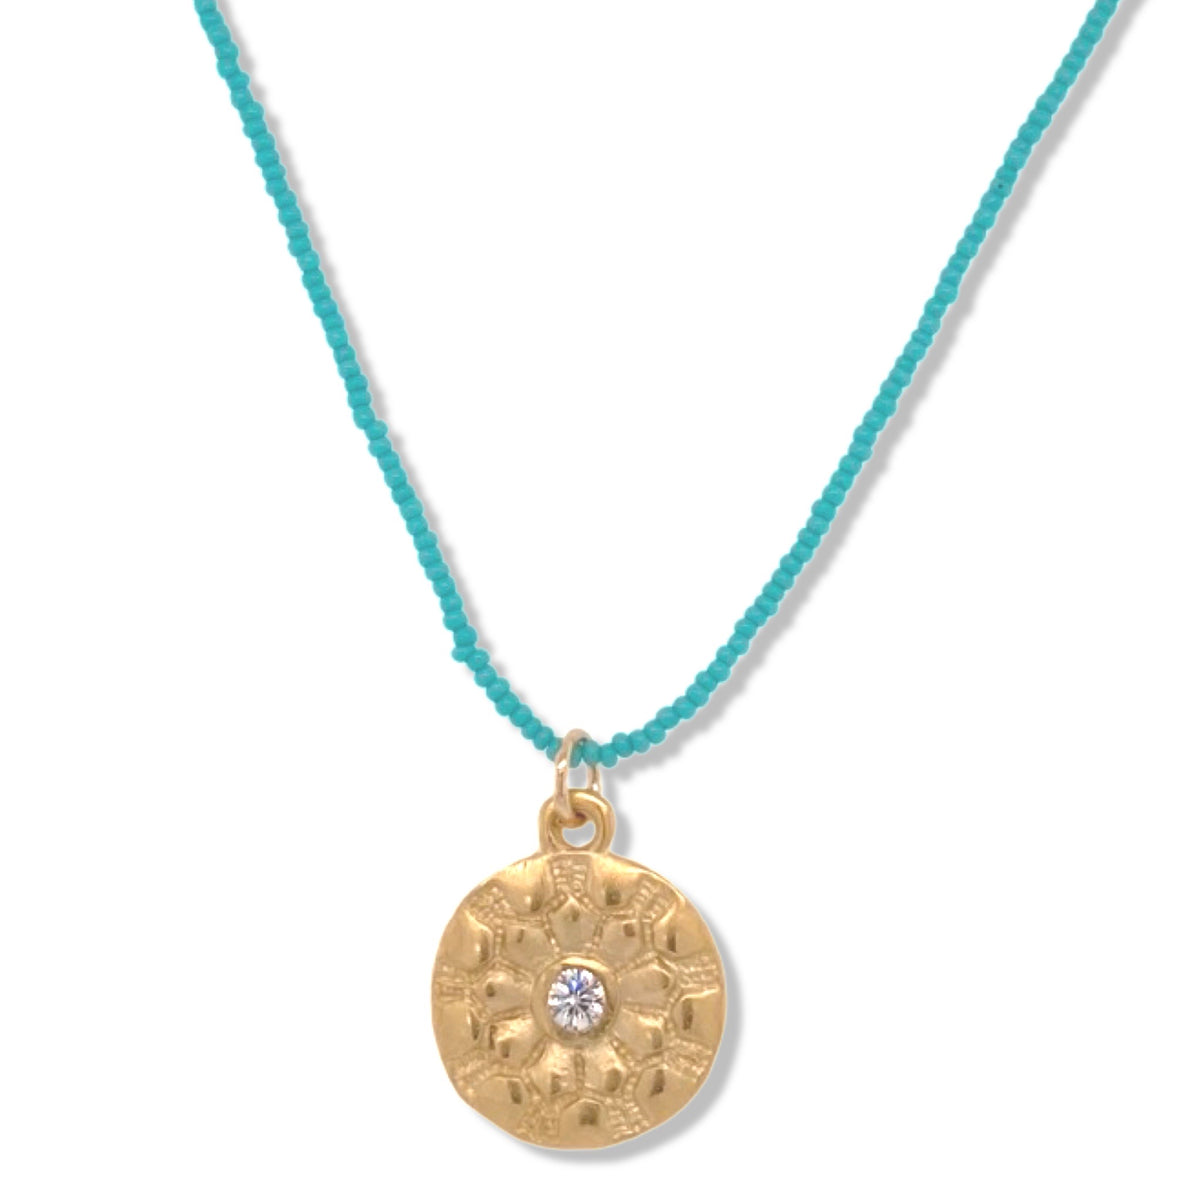 Mara Necklace in Gold on Turquoise Beads | Keely Smith Jewelry Designs